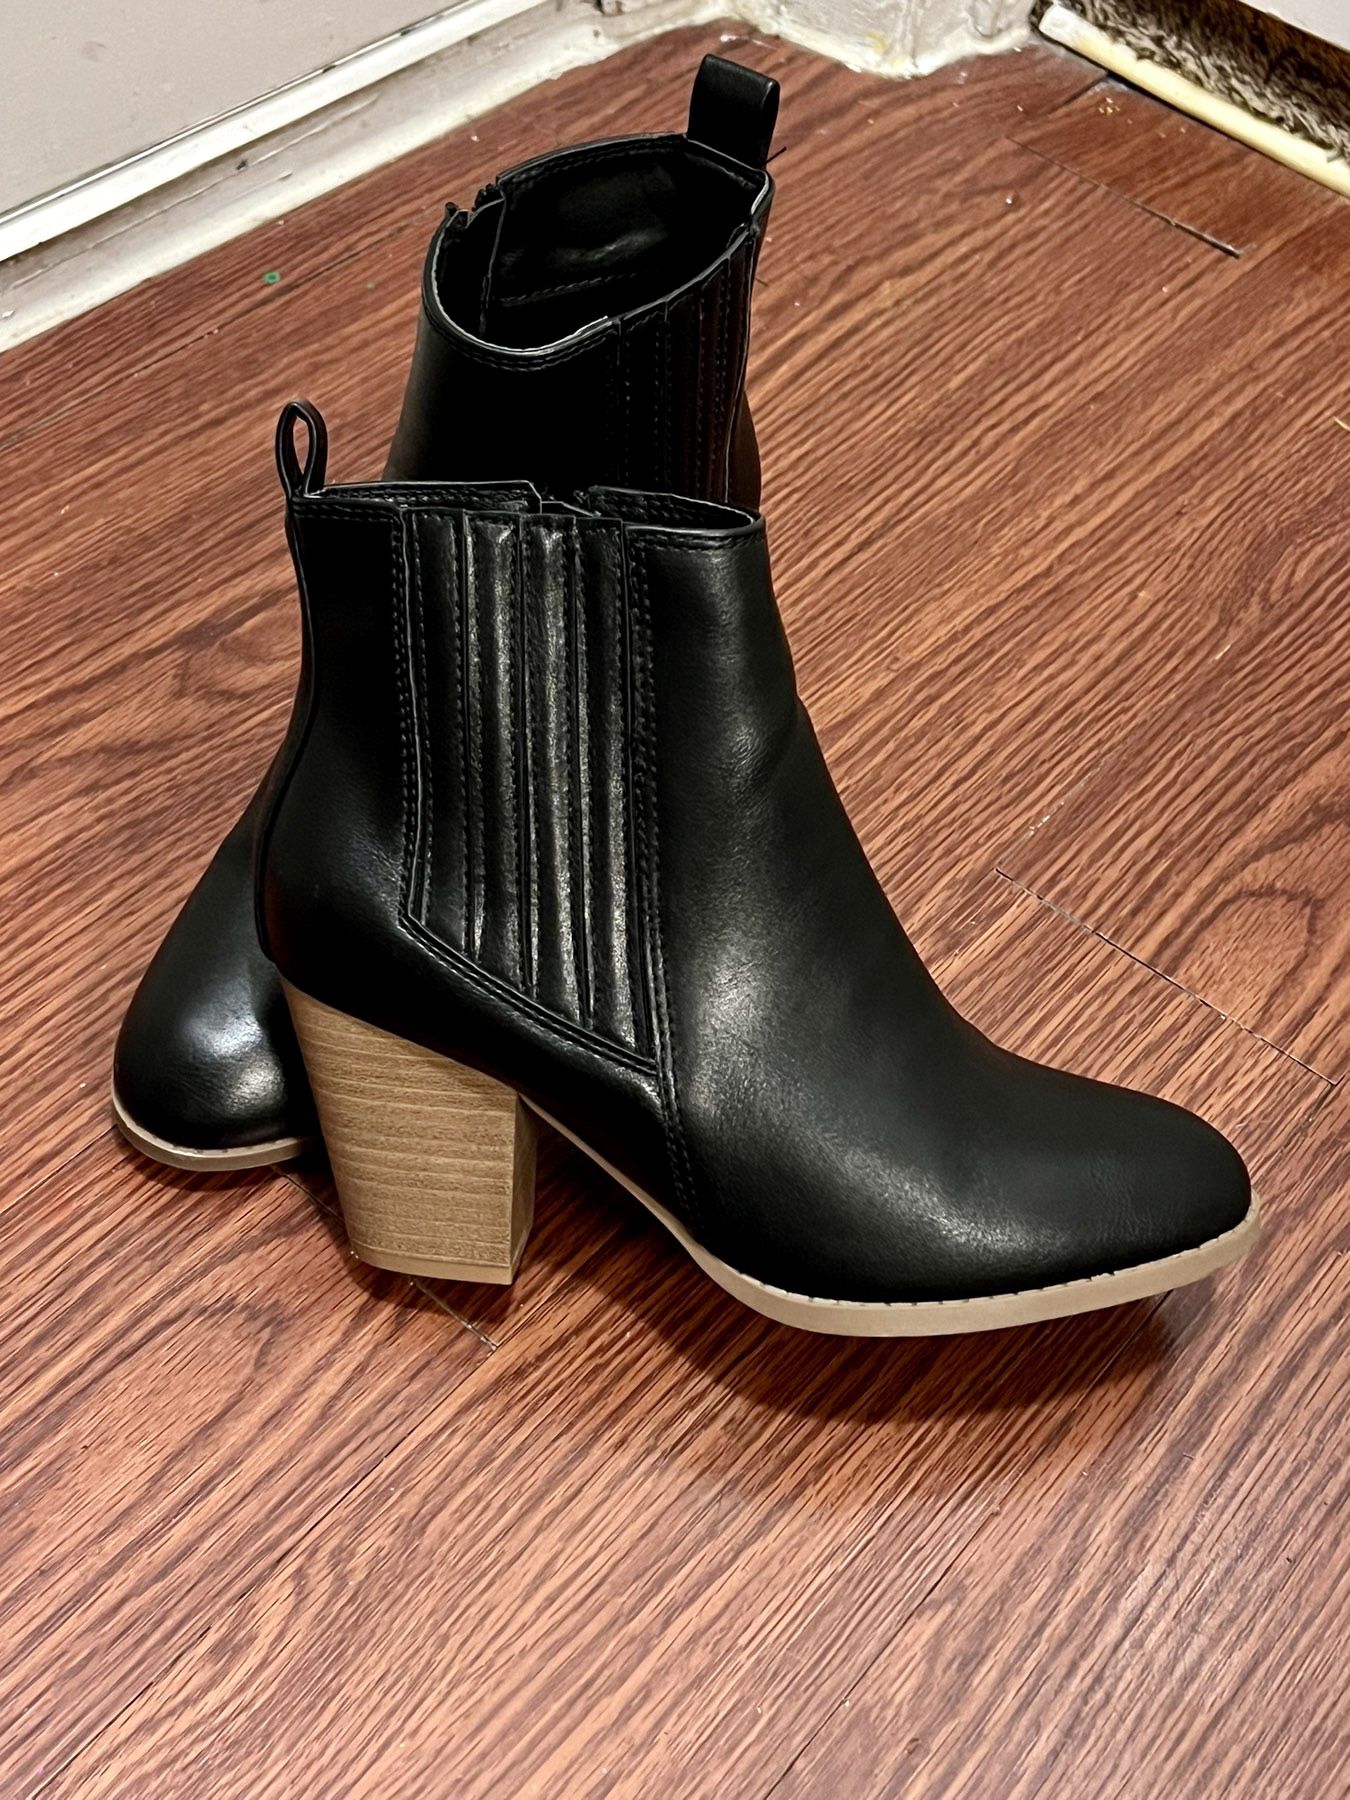 Women’s Boots Size 7.1/2 Like New 